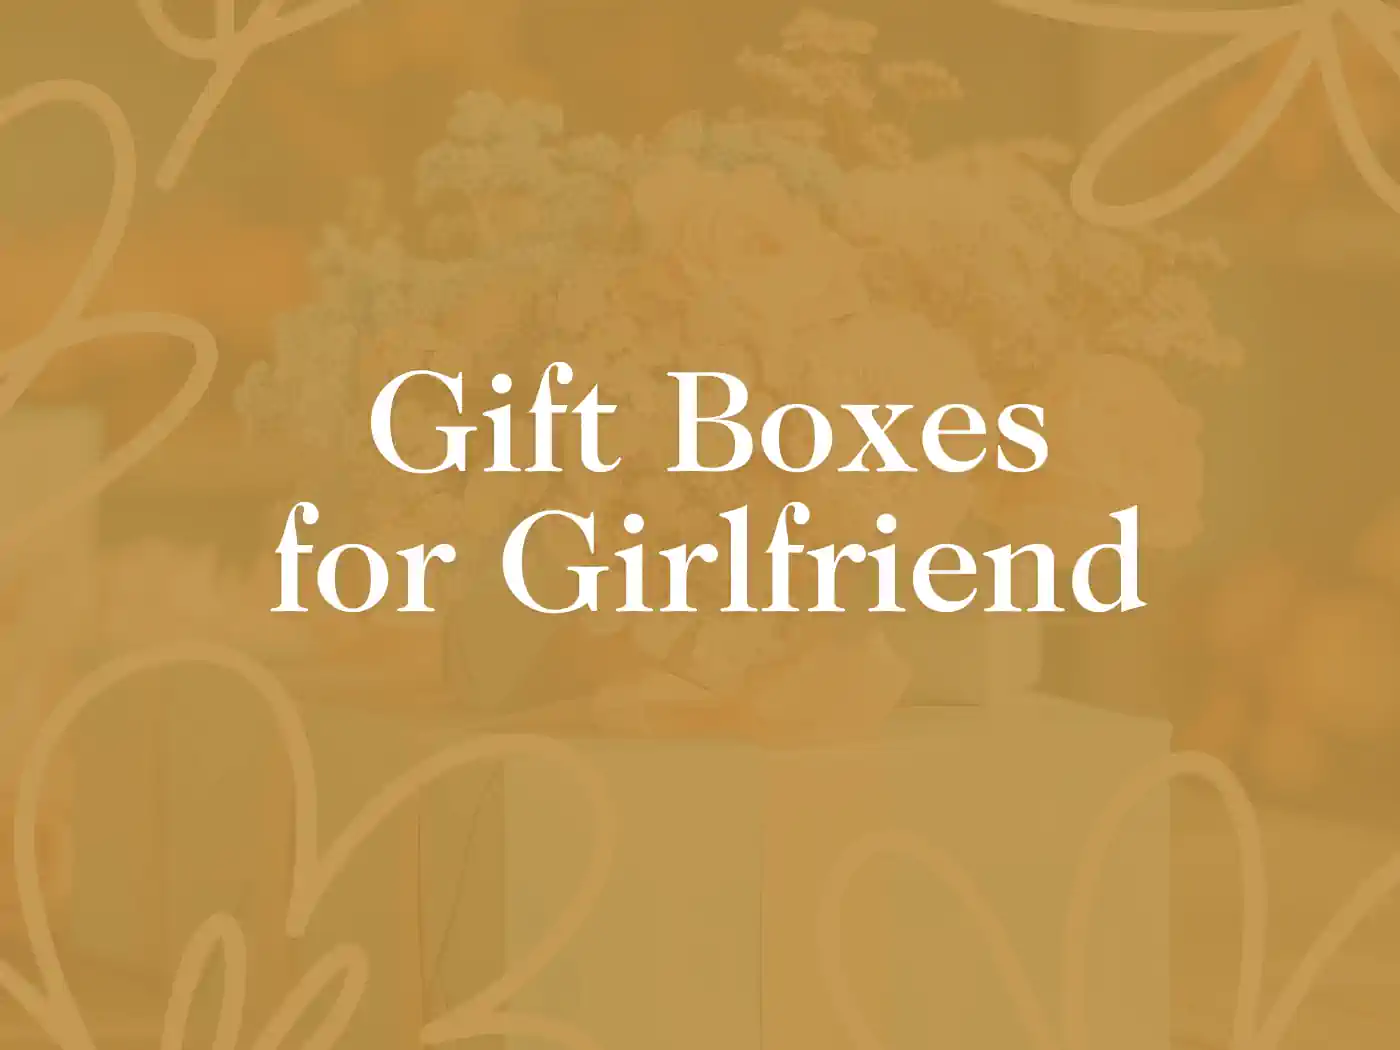 A bouquet of delicate flowers and neatly wrapped gifts, overlaid with the text "Gift Boxes for Girlfriend" against a warm, golden background. Fabulous Flowers and Gifts at the end. Gift Boxes for Boyfriend. 